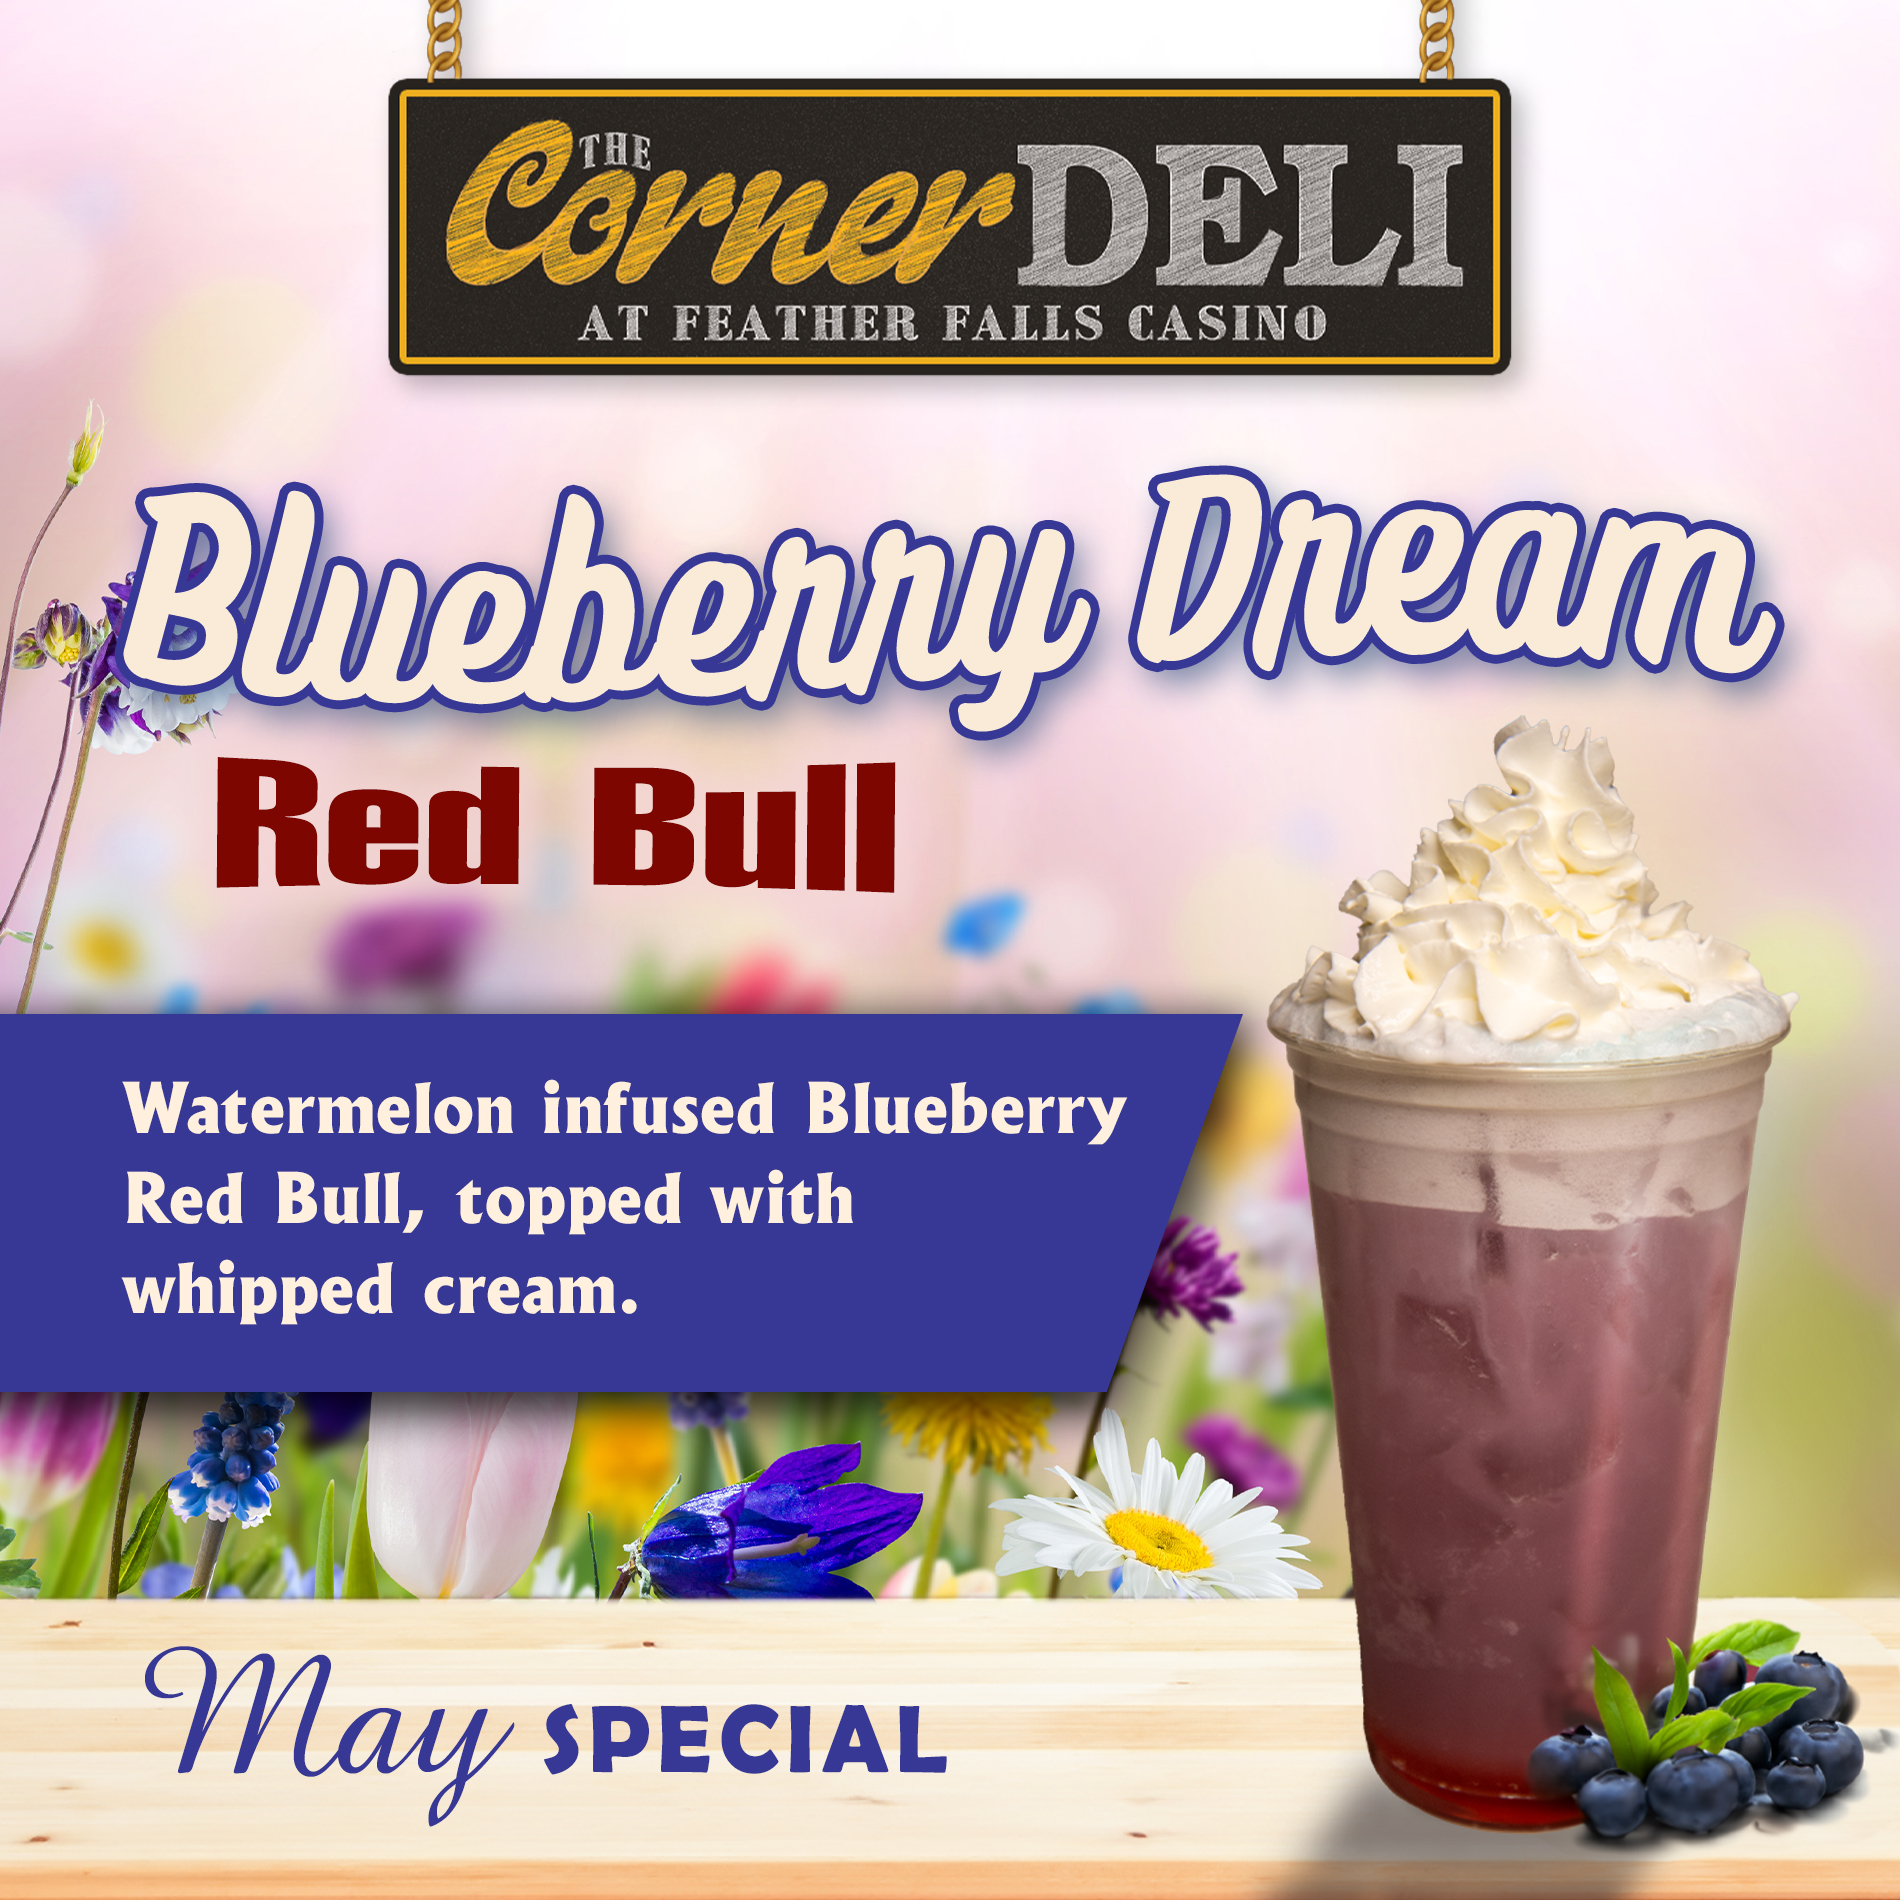 Deli May Red Bull Special - Blueberry Dream